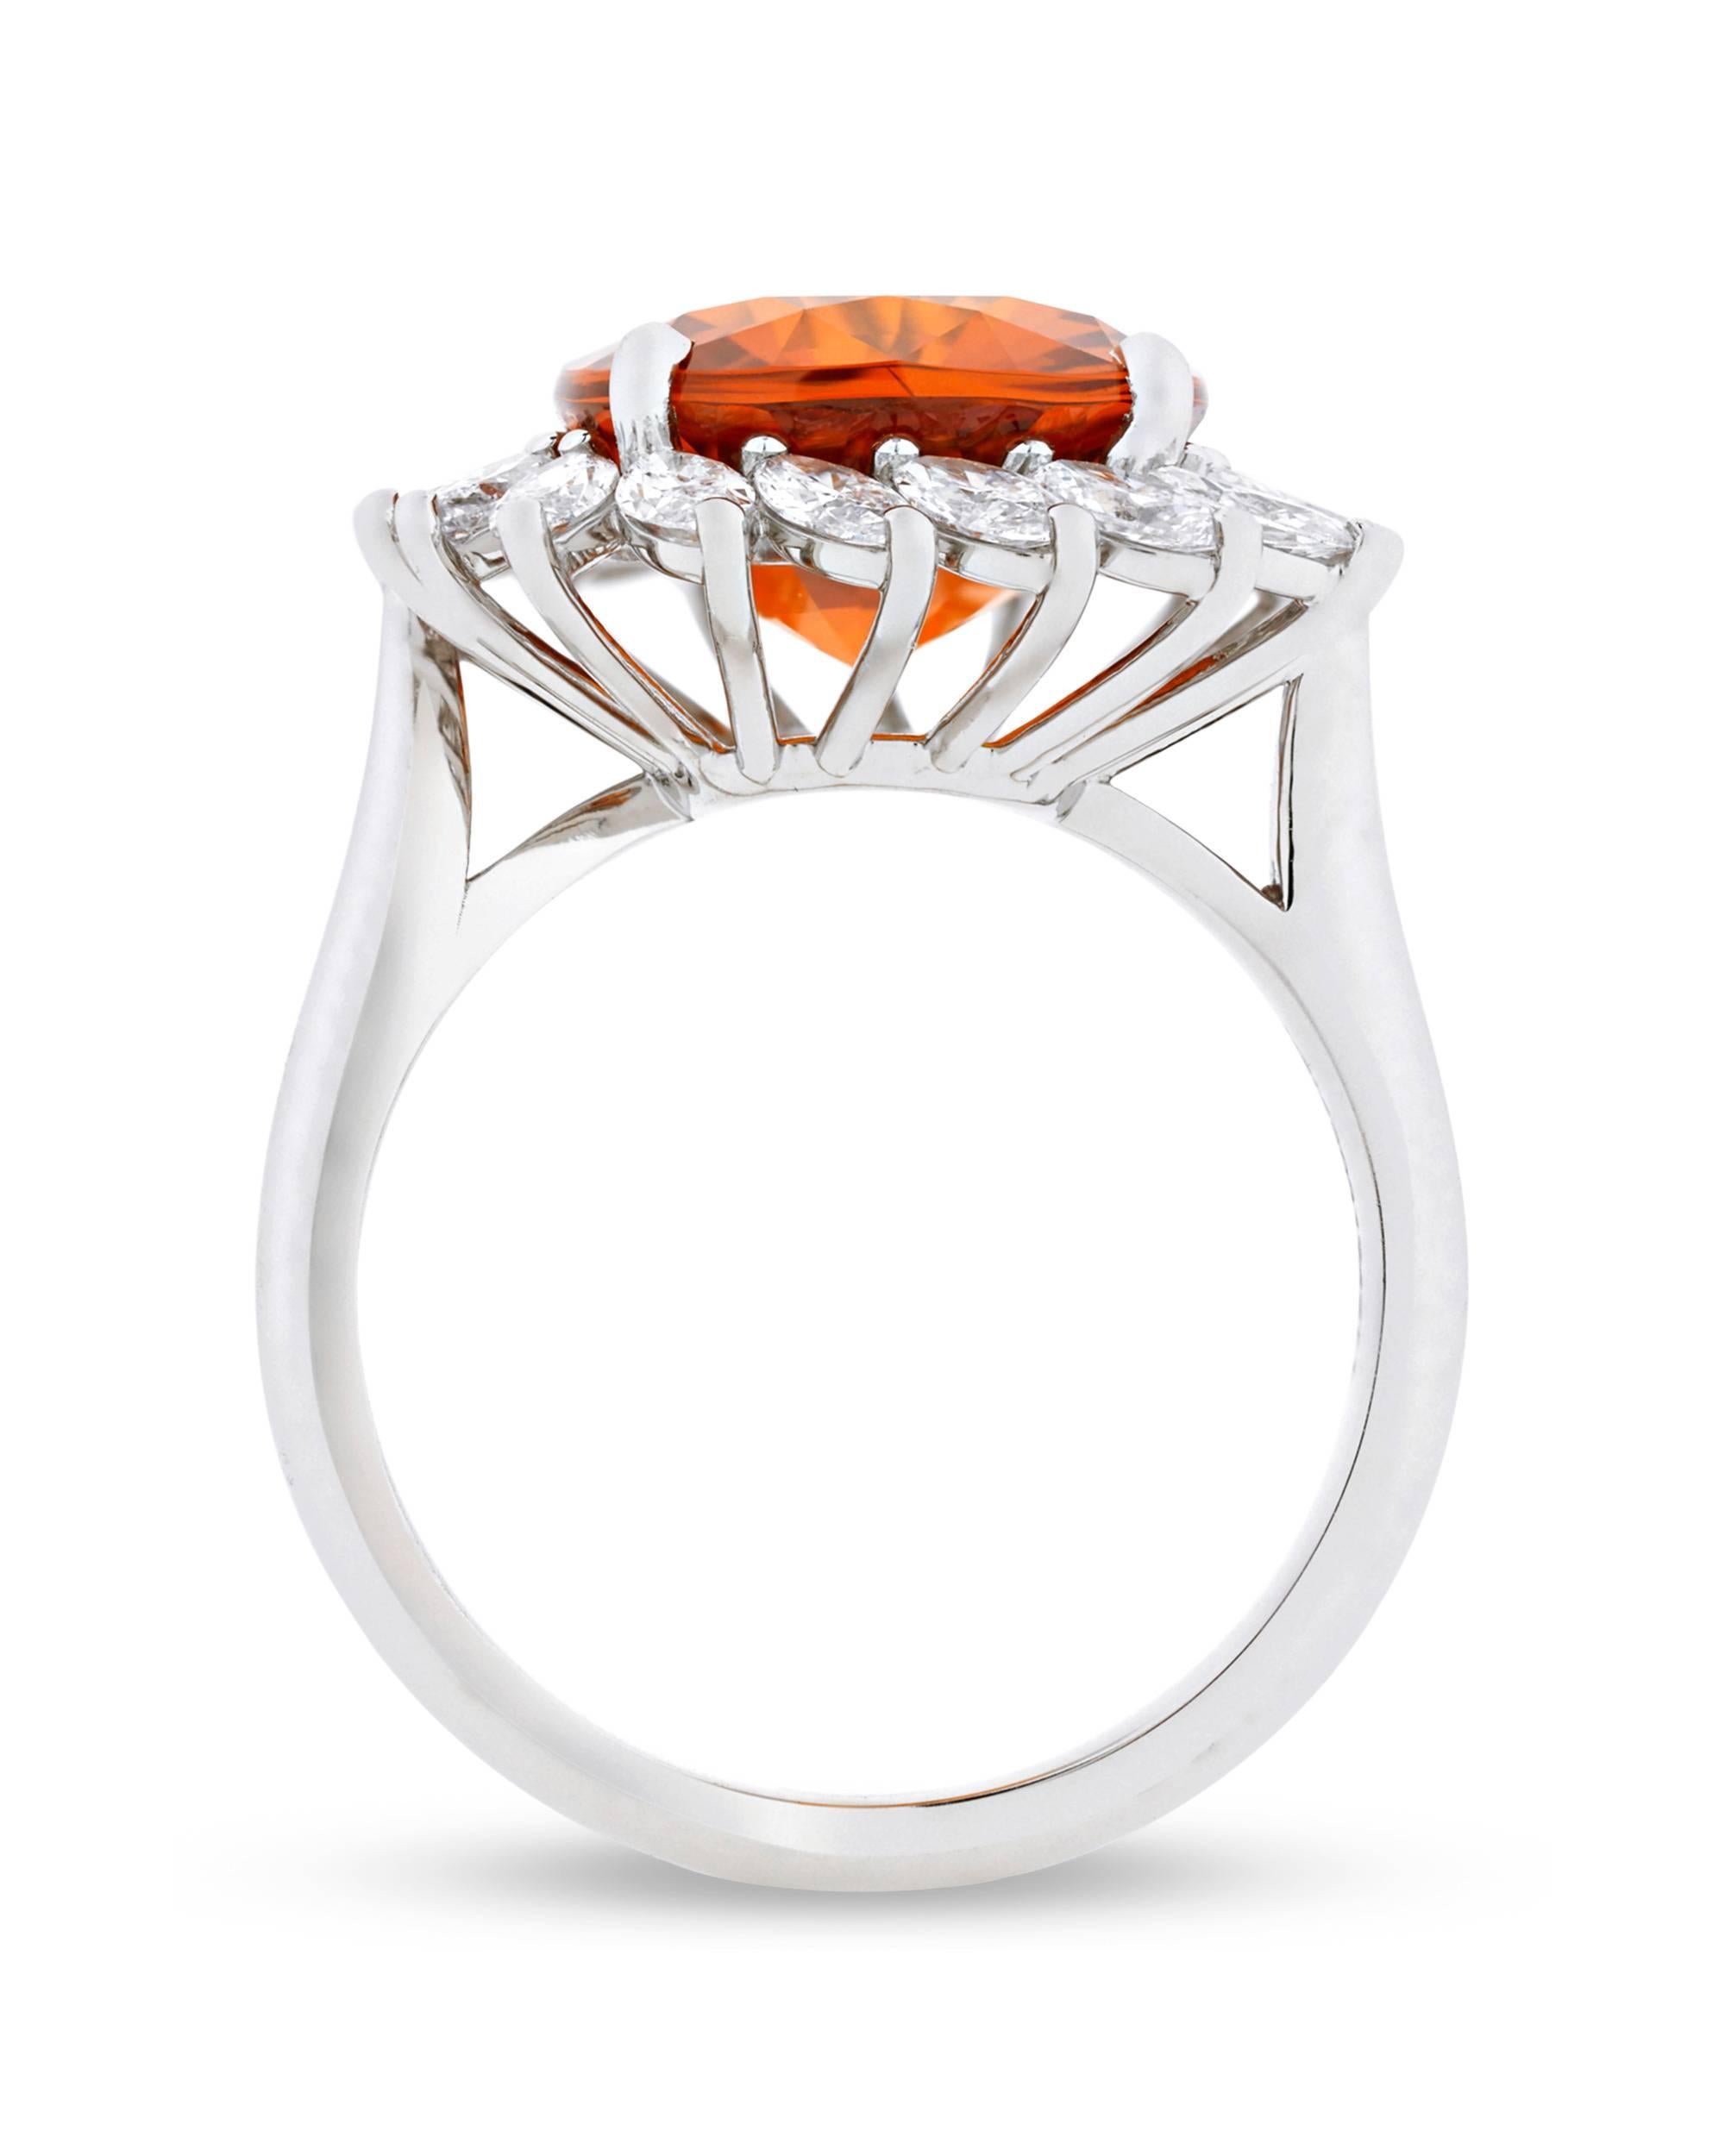 Encircled by a laurel wreath of exquisite marquise white diamonds is this captivating 8.08-carat orange sapphire. While sapphires are most commonly found in shades of yellow or blue, this jewel's rich orange is reminiscent of a mandarin garnet or